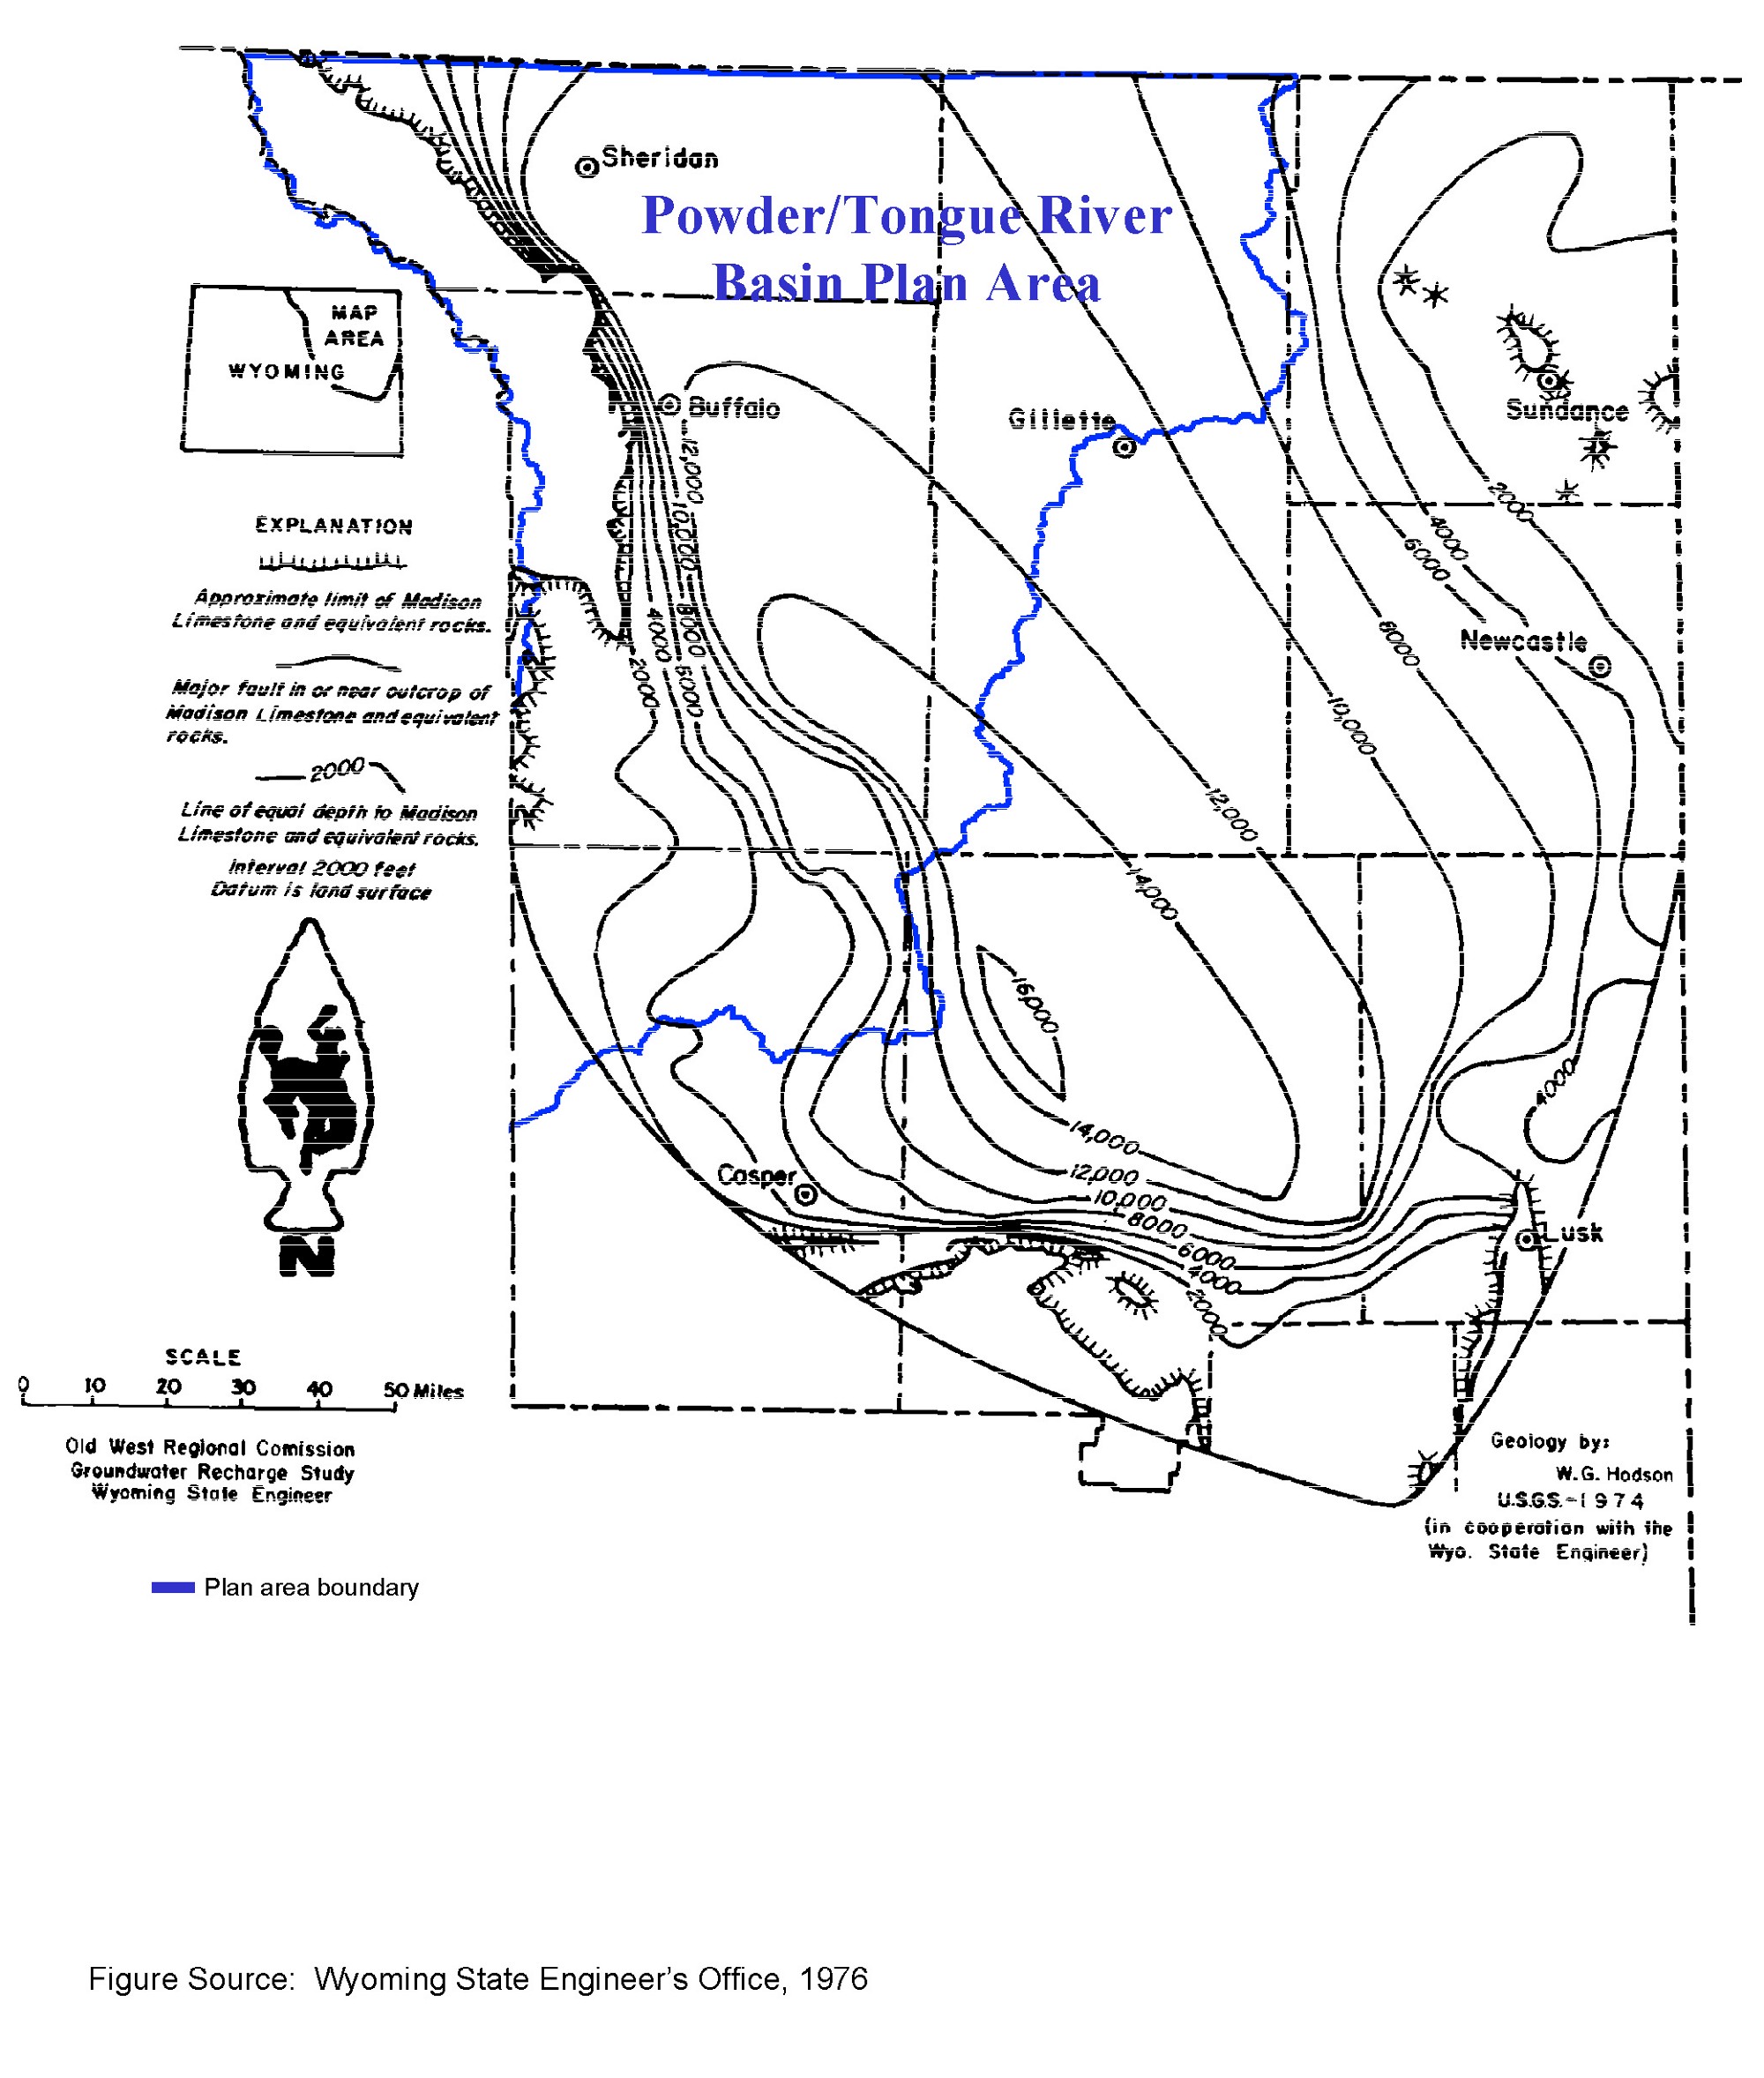 Depth to the Madison Limeston and 
Equivalent Rocks in the Powder River Structural Basin abd Adjacent Areas